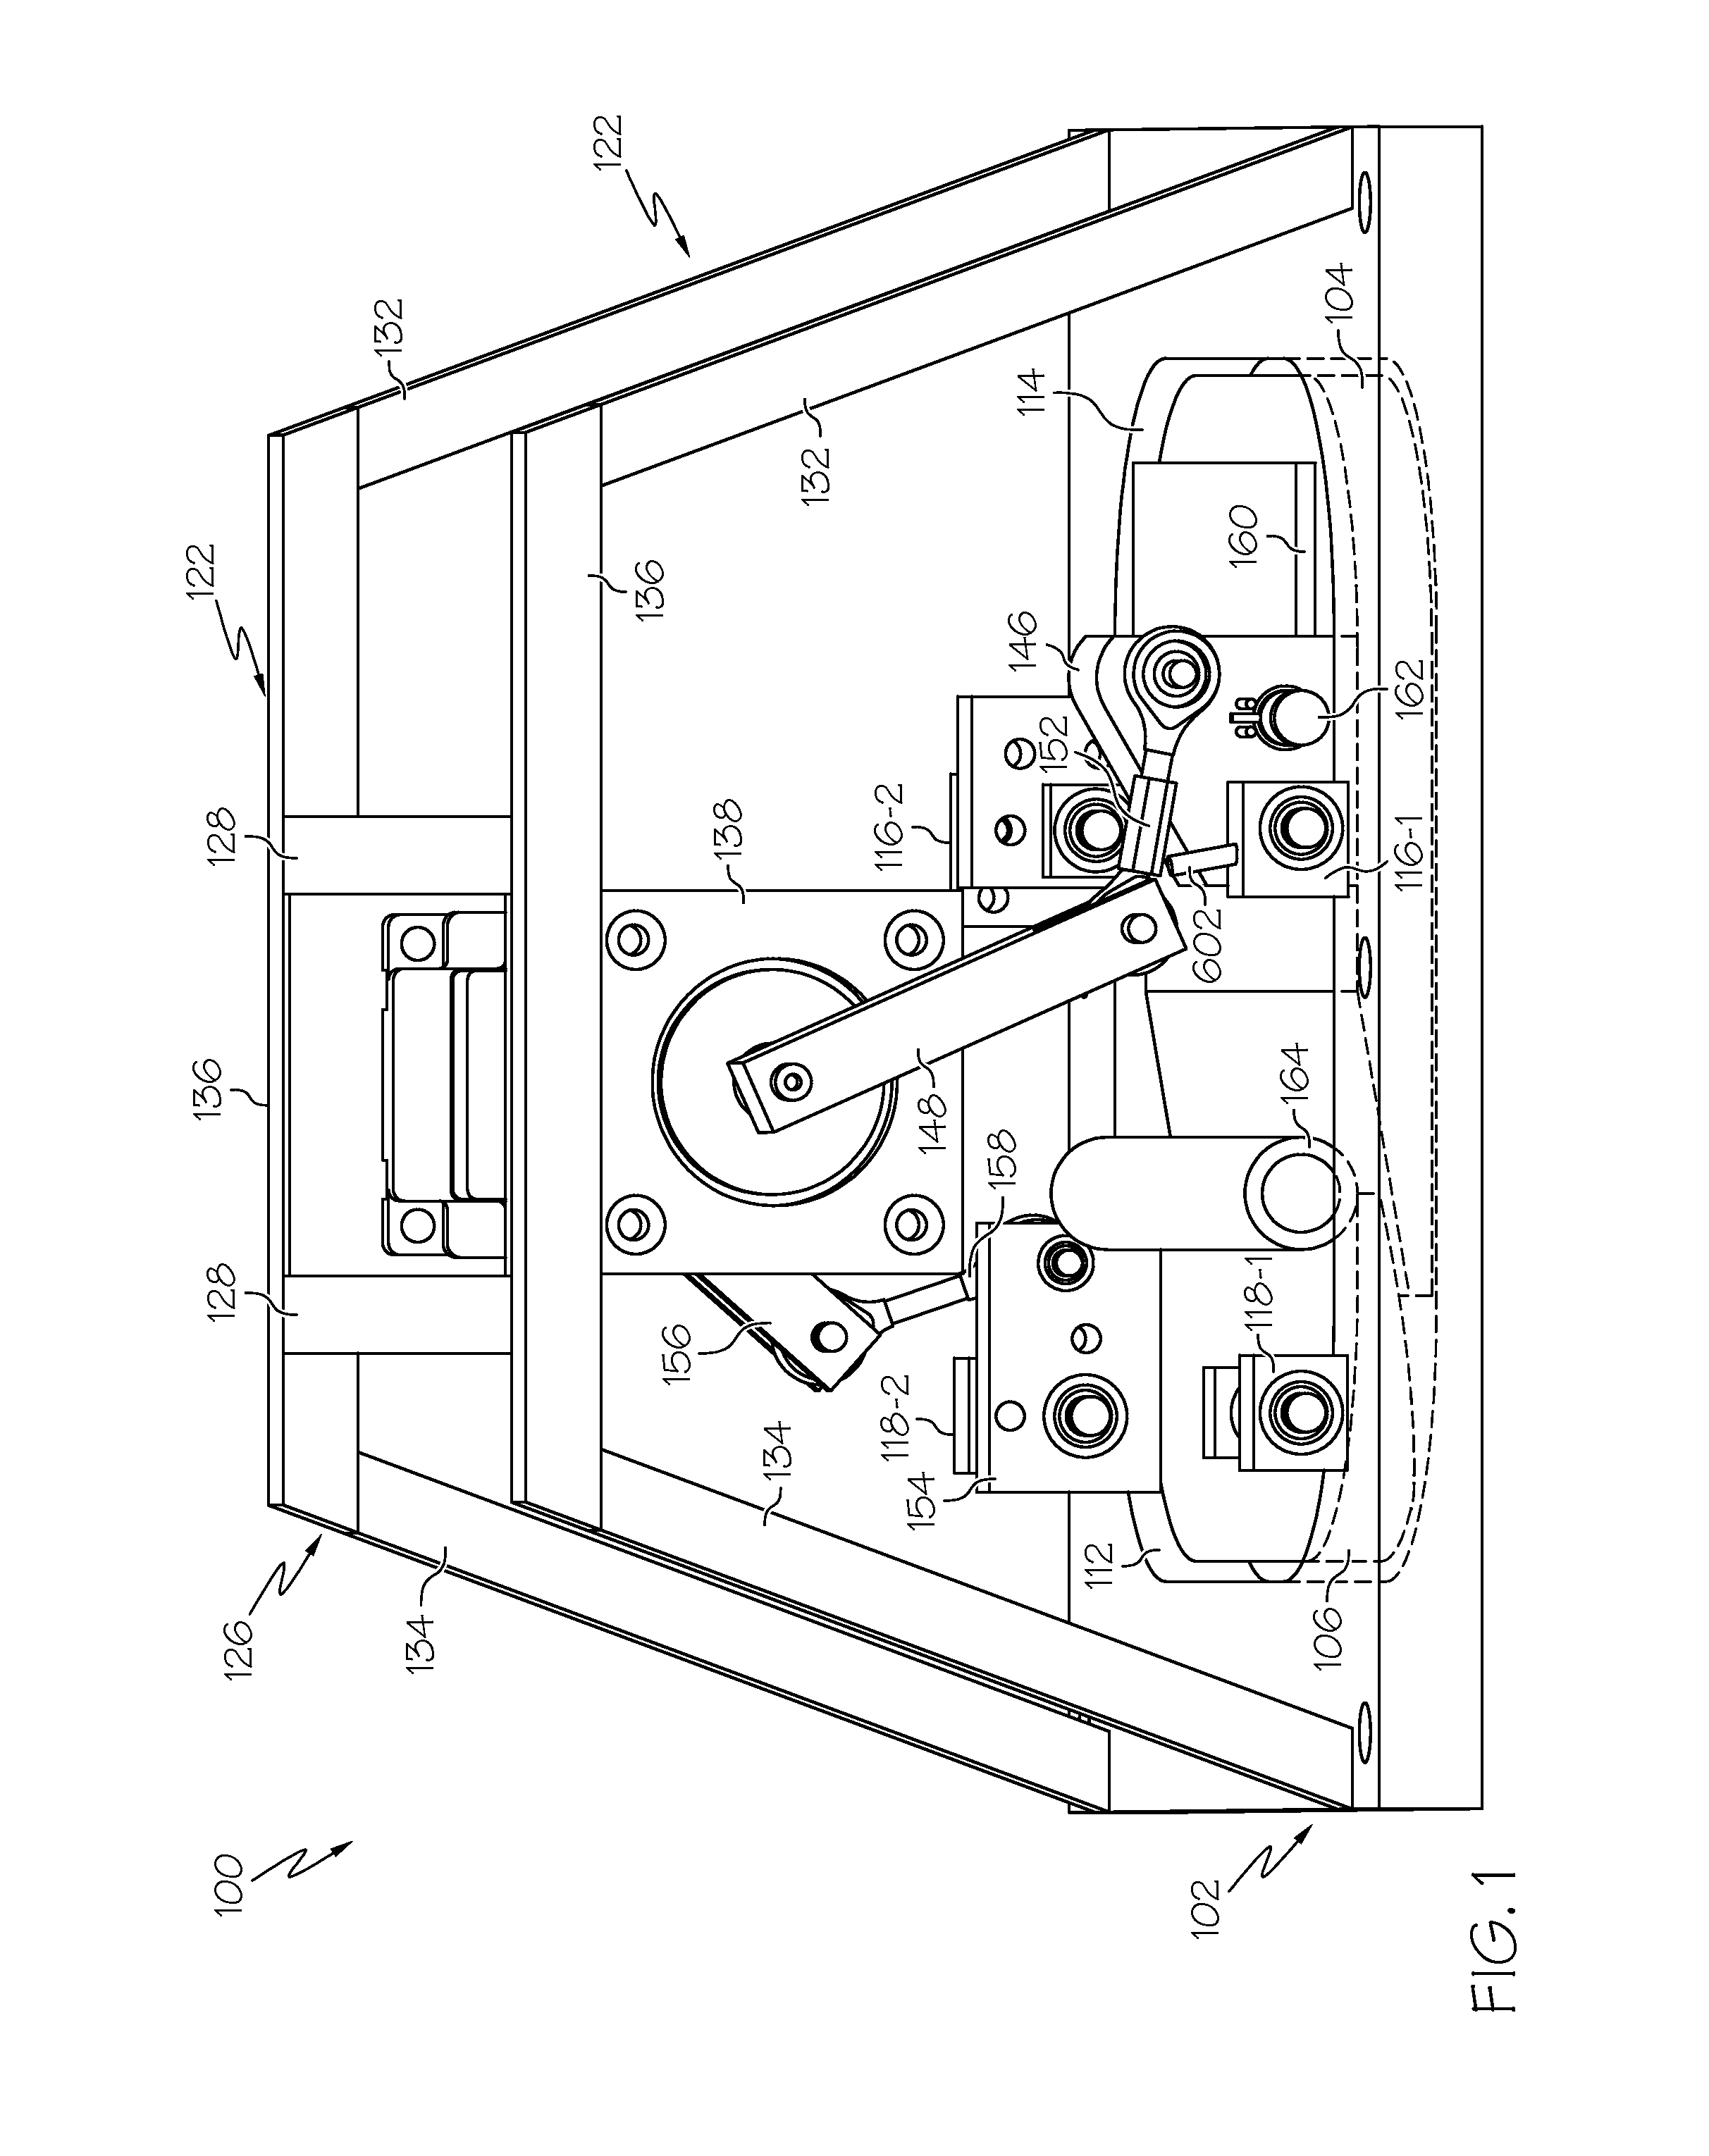 Cabin pressure control system thrust recovery outflow valve and method that enable ram air recovery